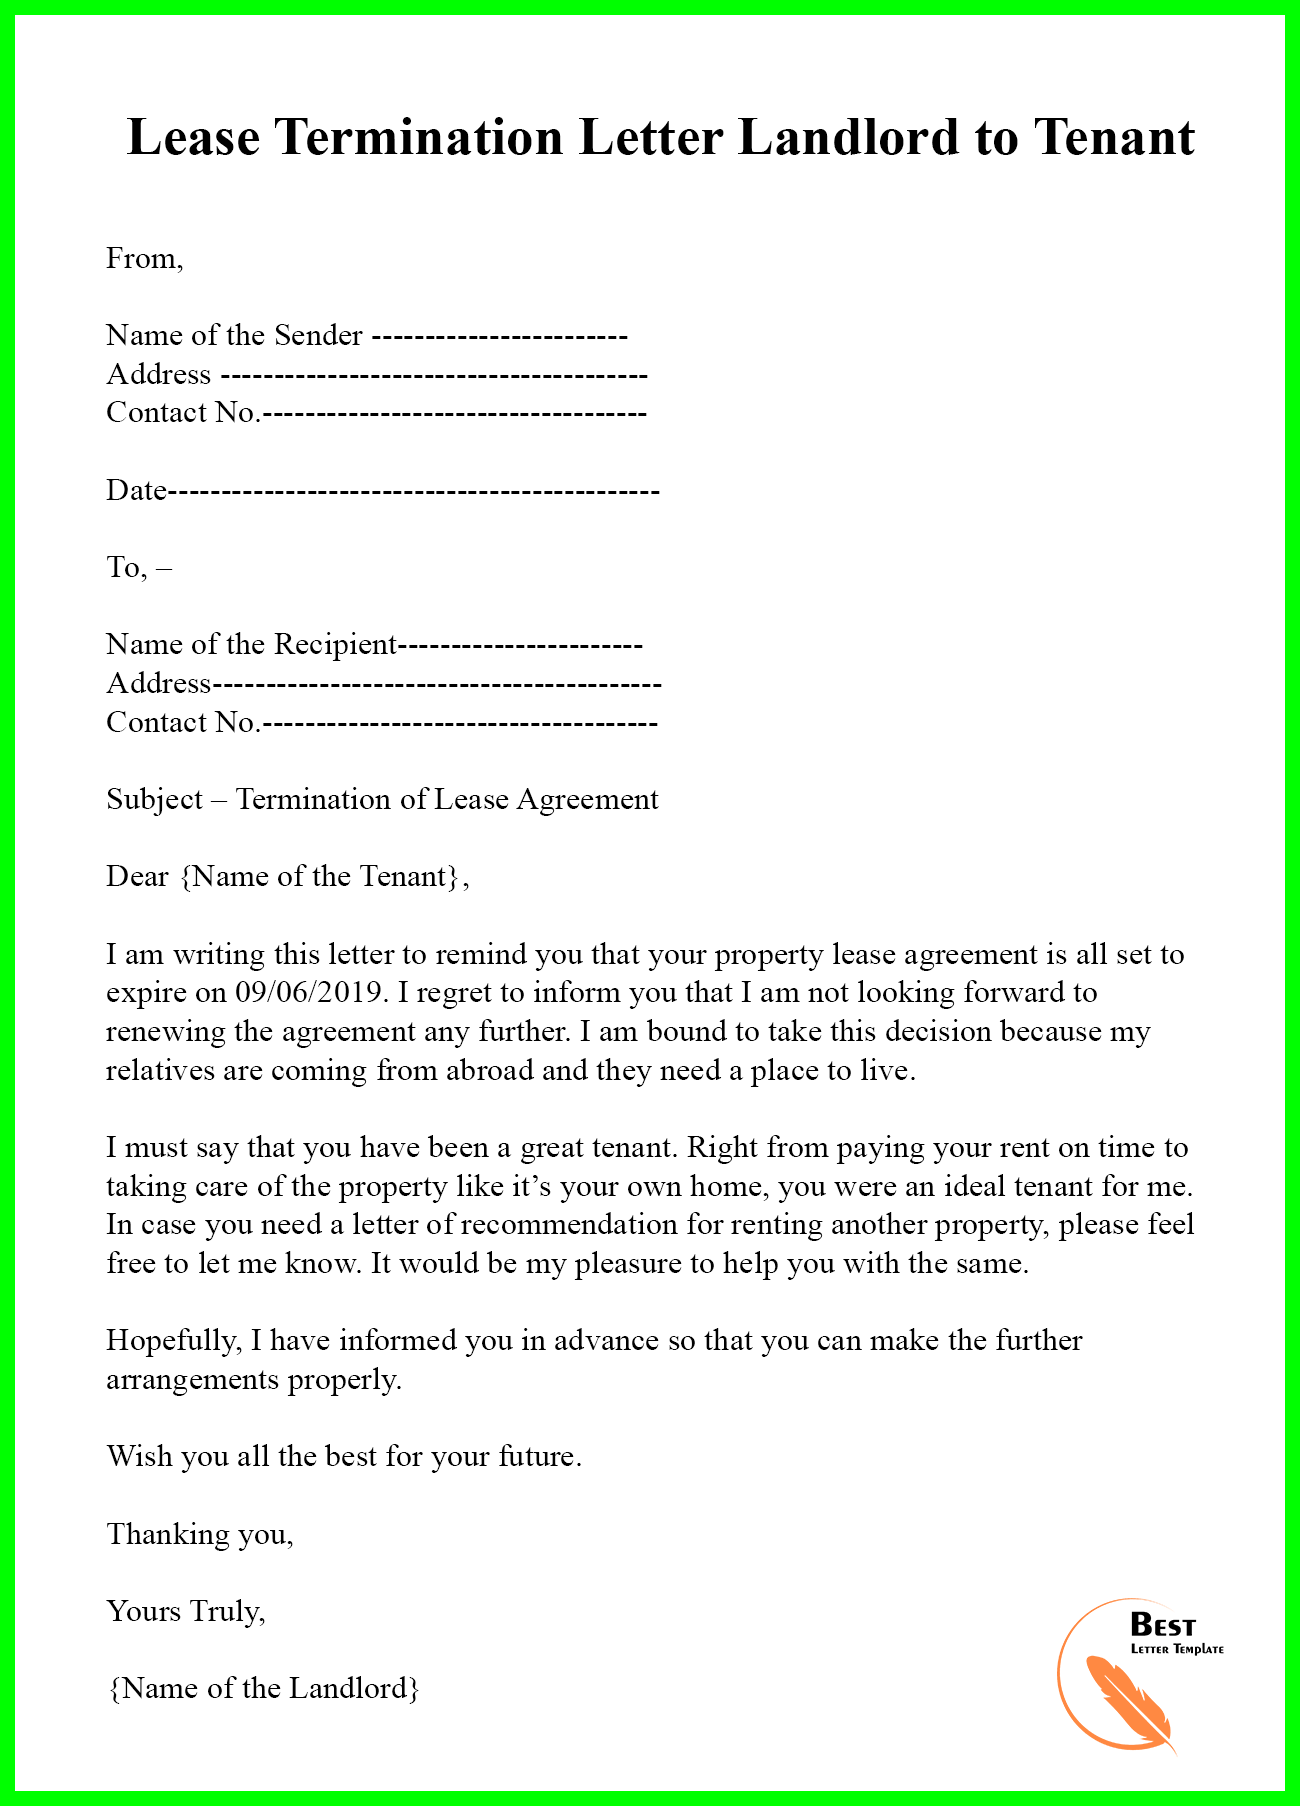 Letter From Landlord To Tenant from bestlettertemplate.com